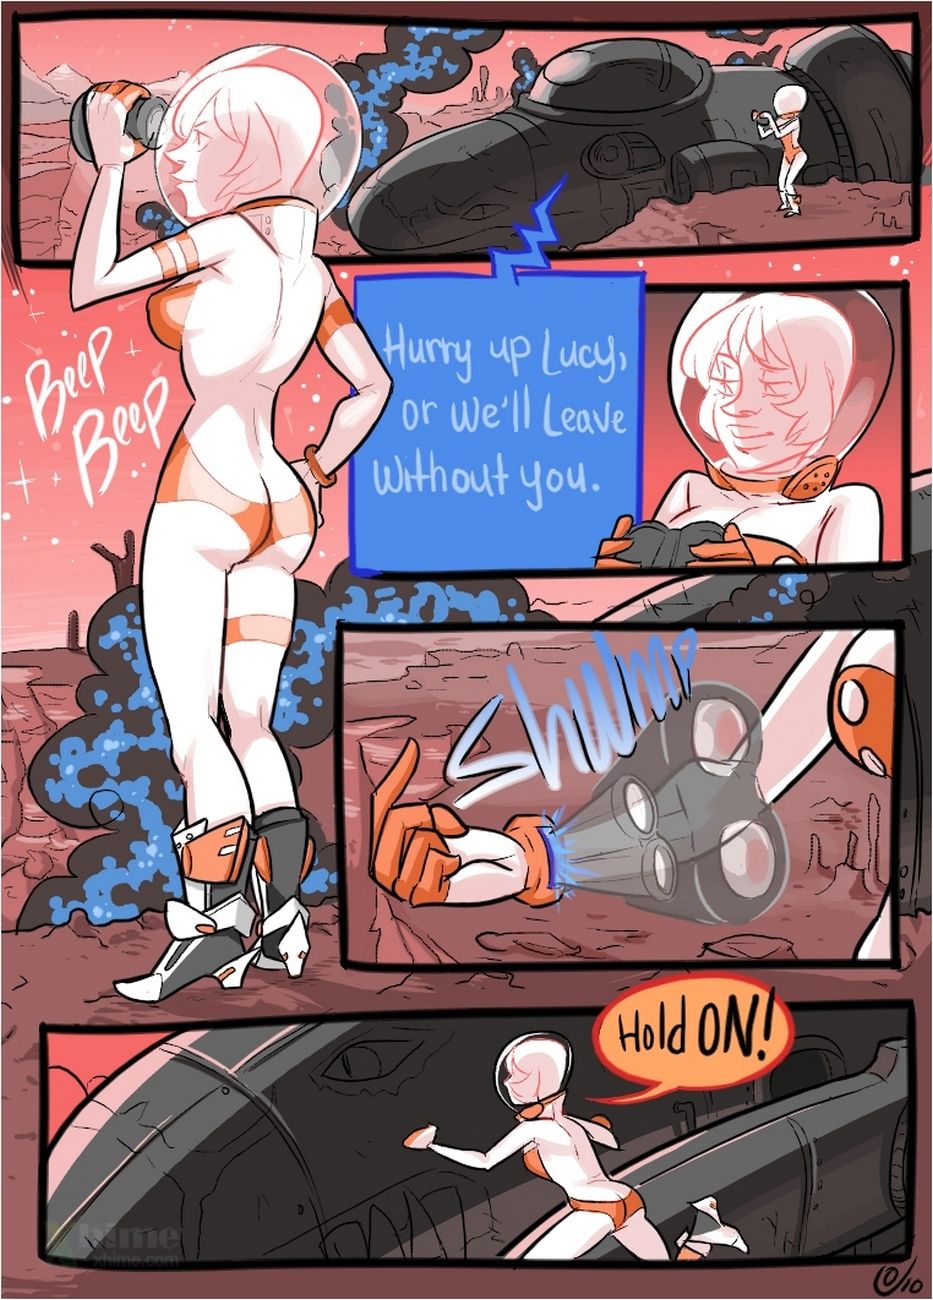 Spacy Lucy 1 - Lonely Human Female Fucks The Galaxy page 2